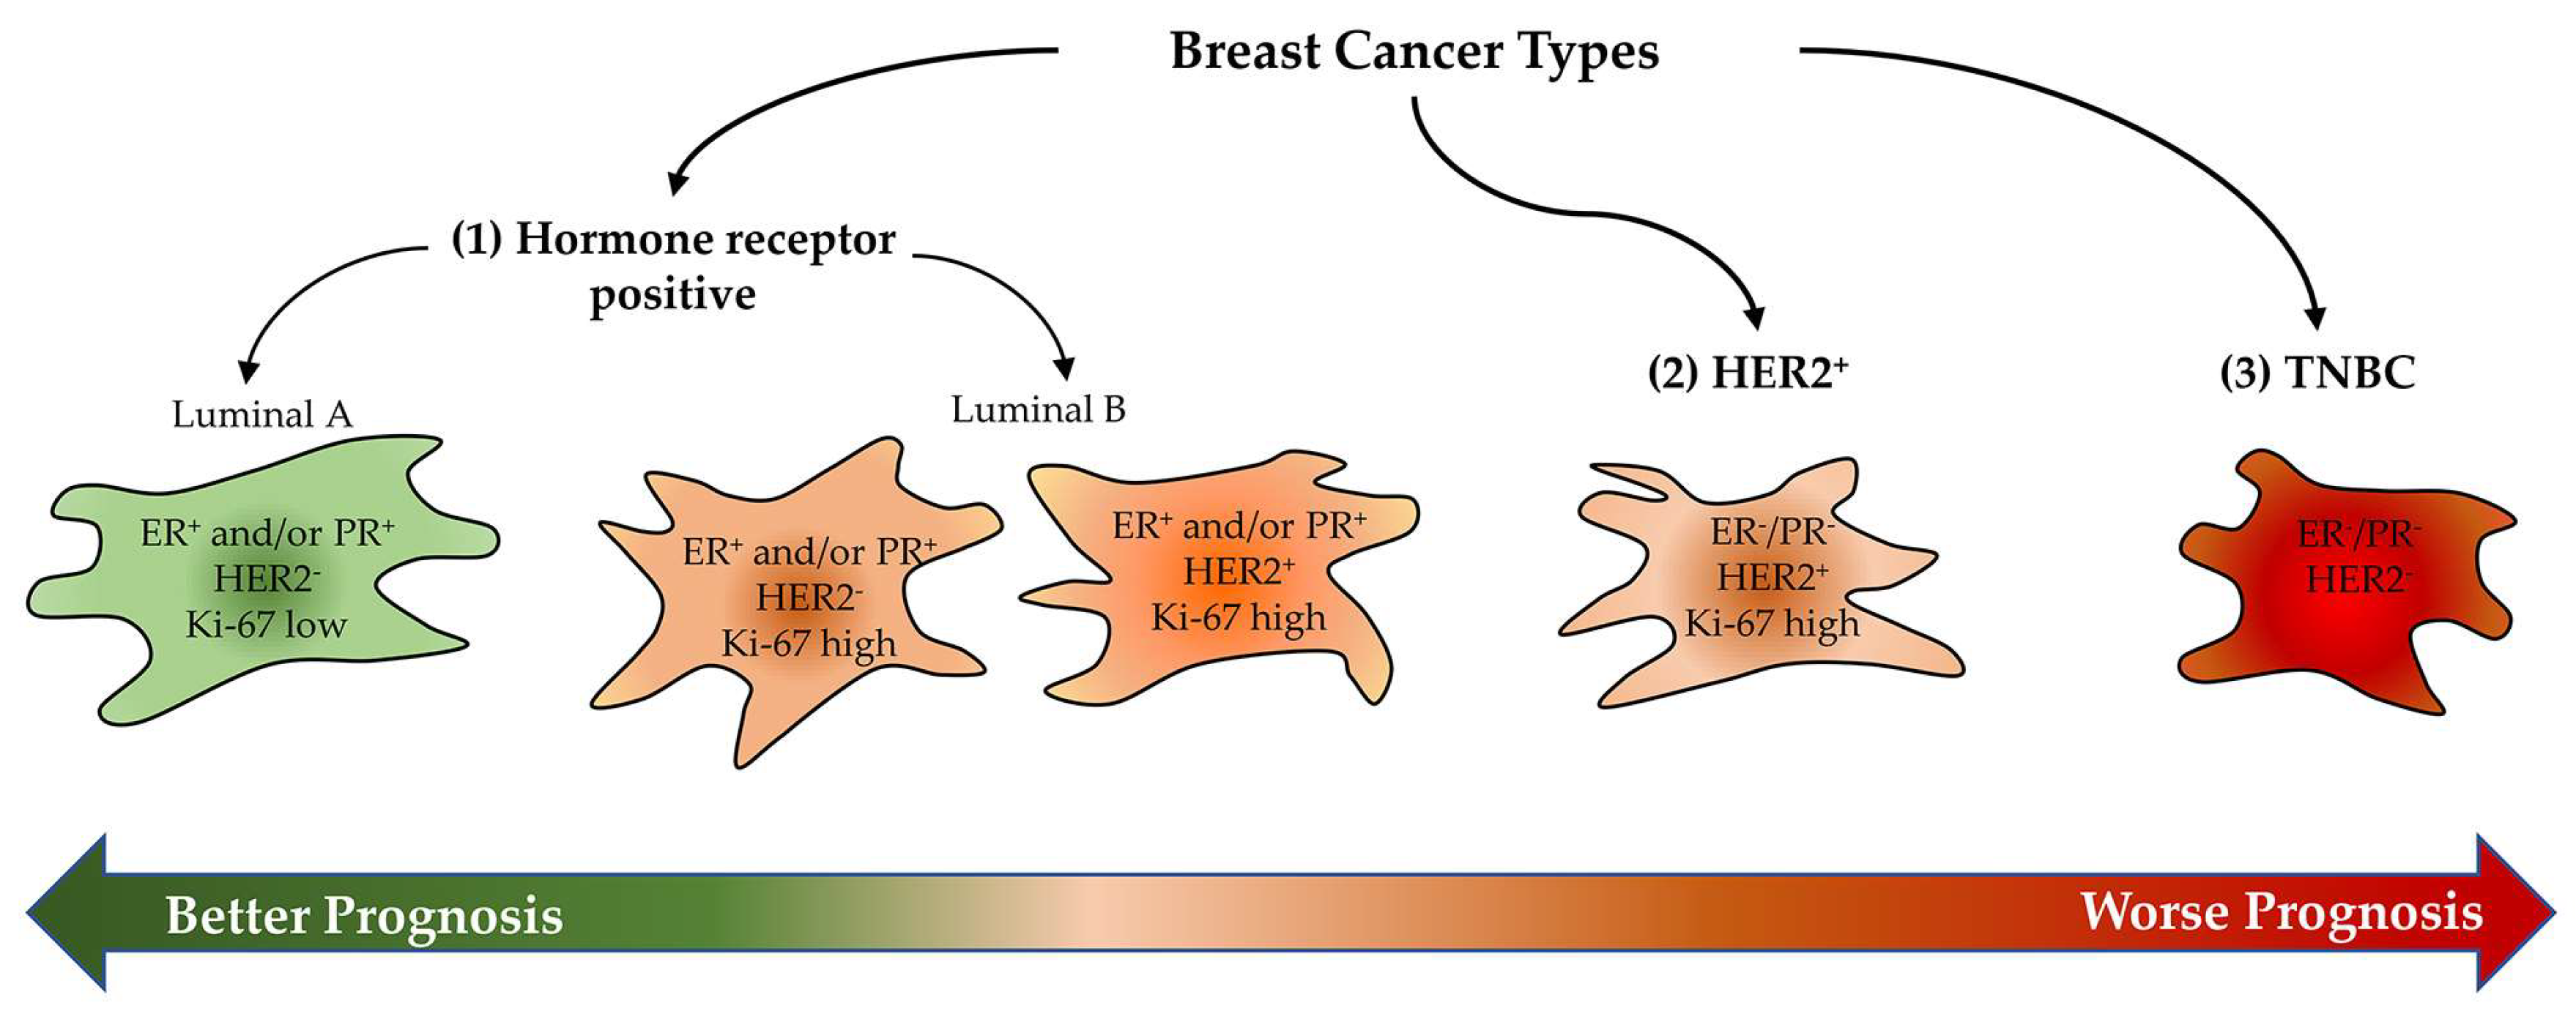 The morphological division of the breast cancer shapes according to the